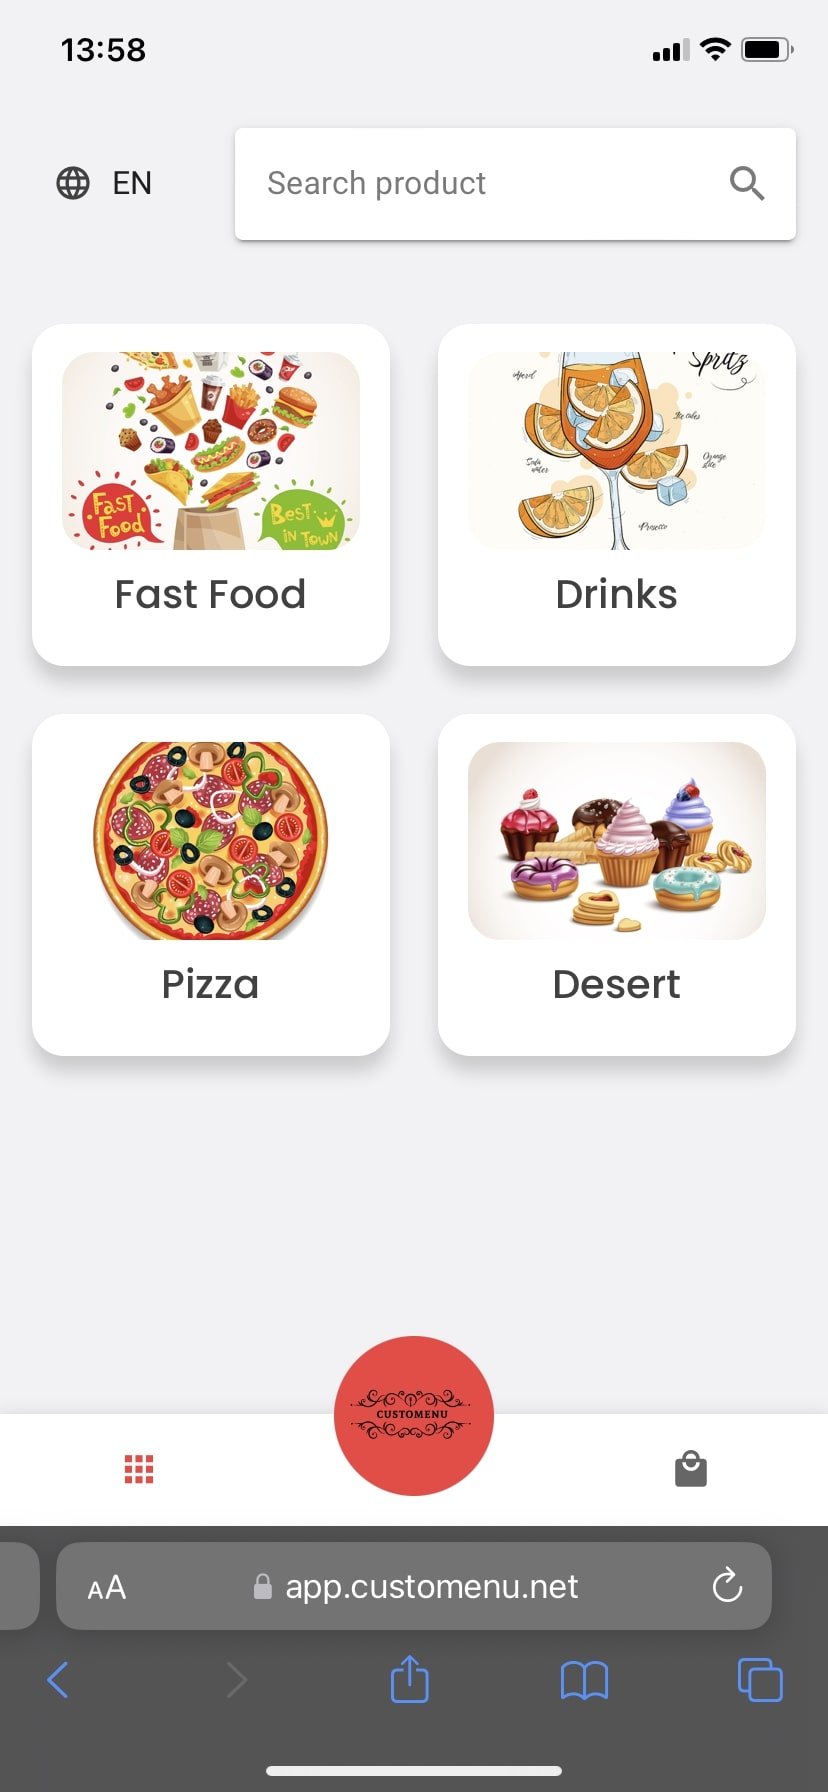 The digital menu benefits from an innovative design, oriented towards an experience dedicated to the users of a restaurant. The product categories are accessible from the first screen.